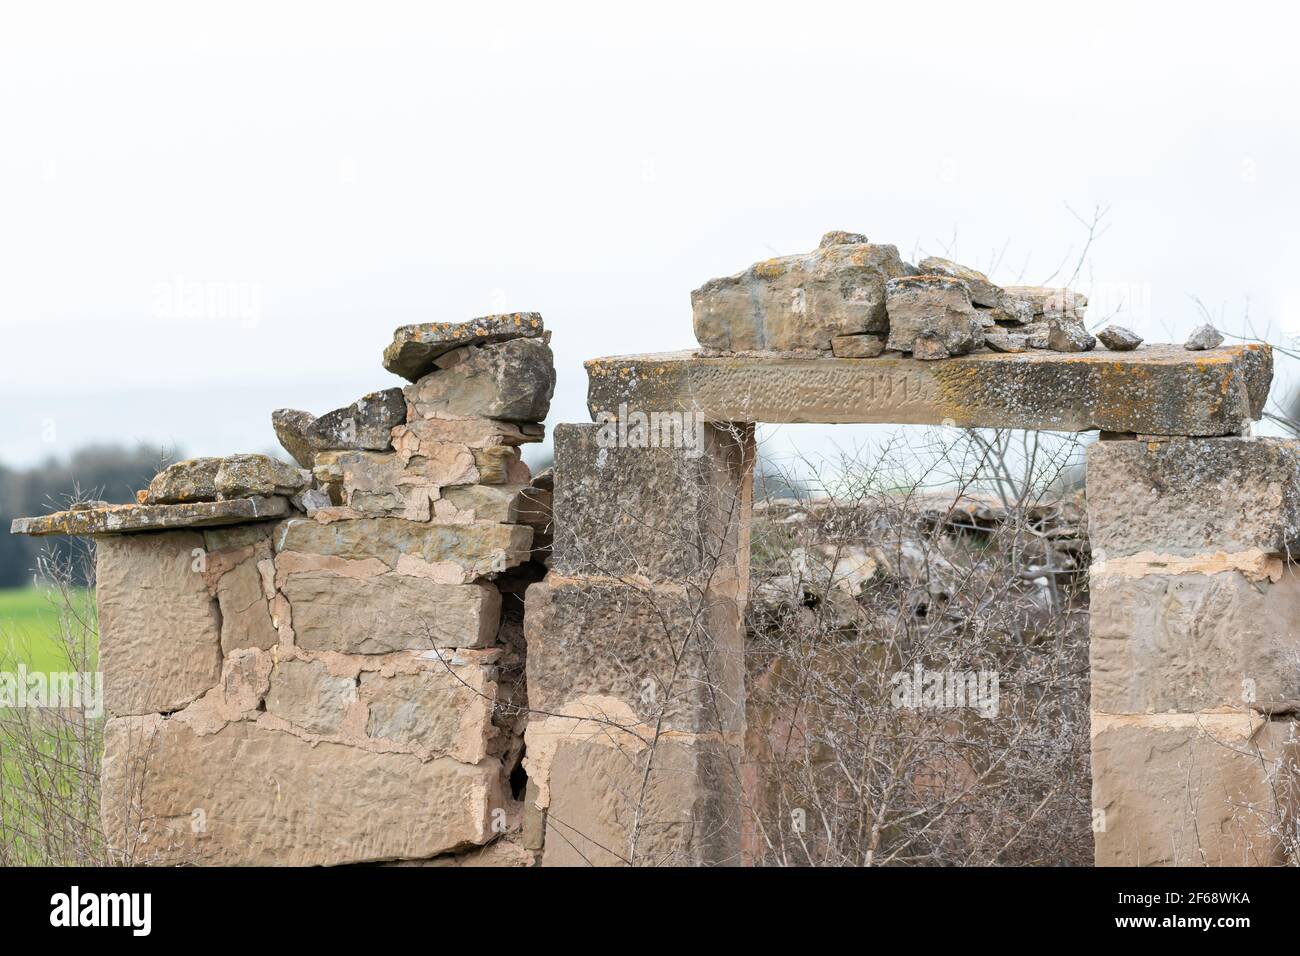 front view of an old farmer's hut made of stone, abandoned and in ruins. Stock Photo